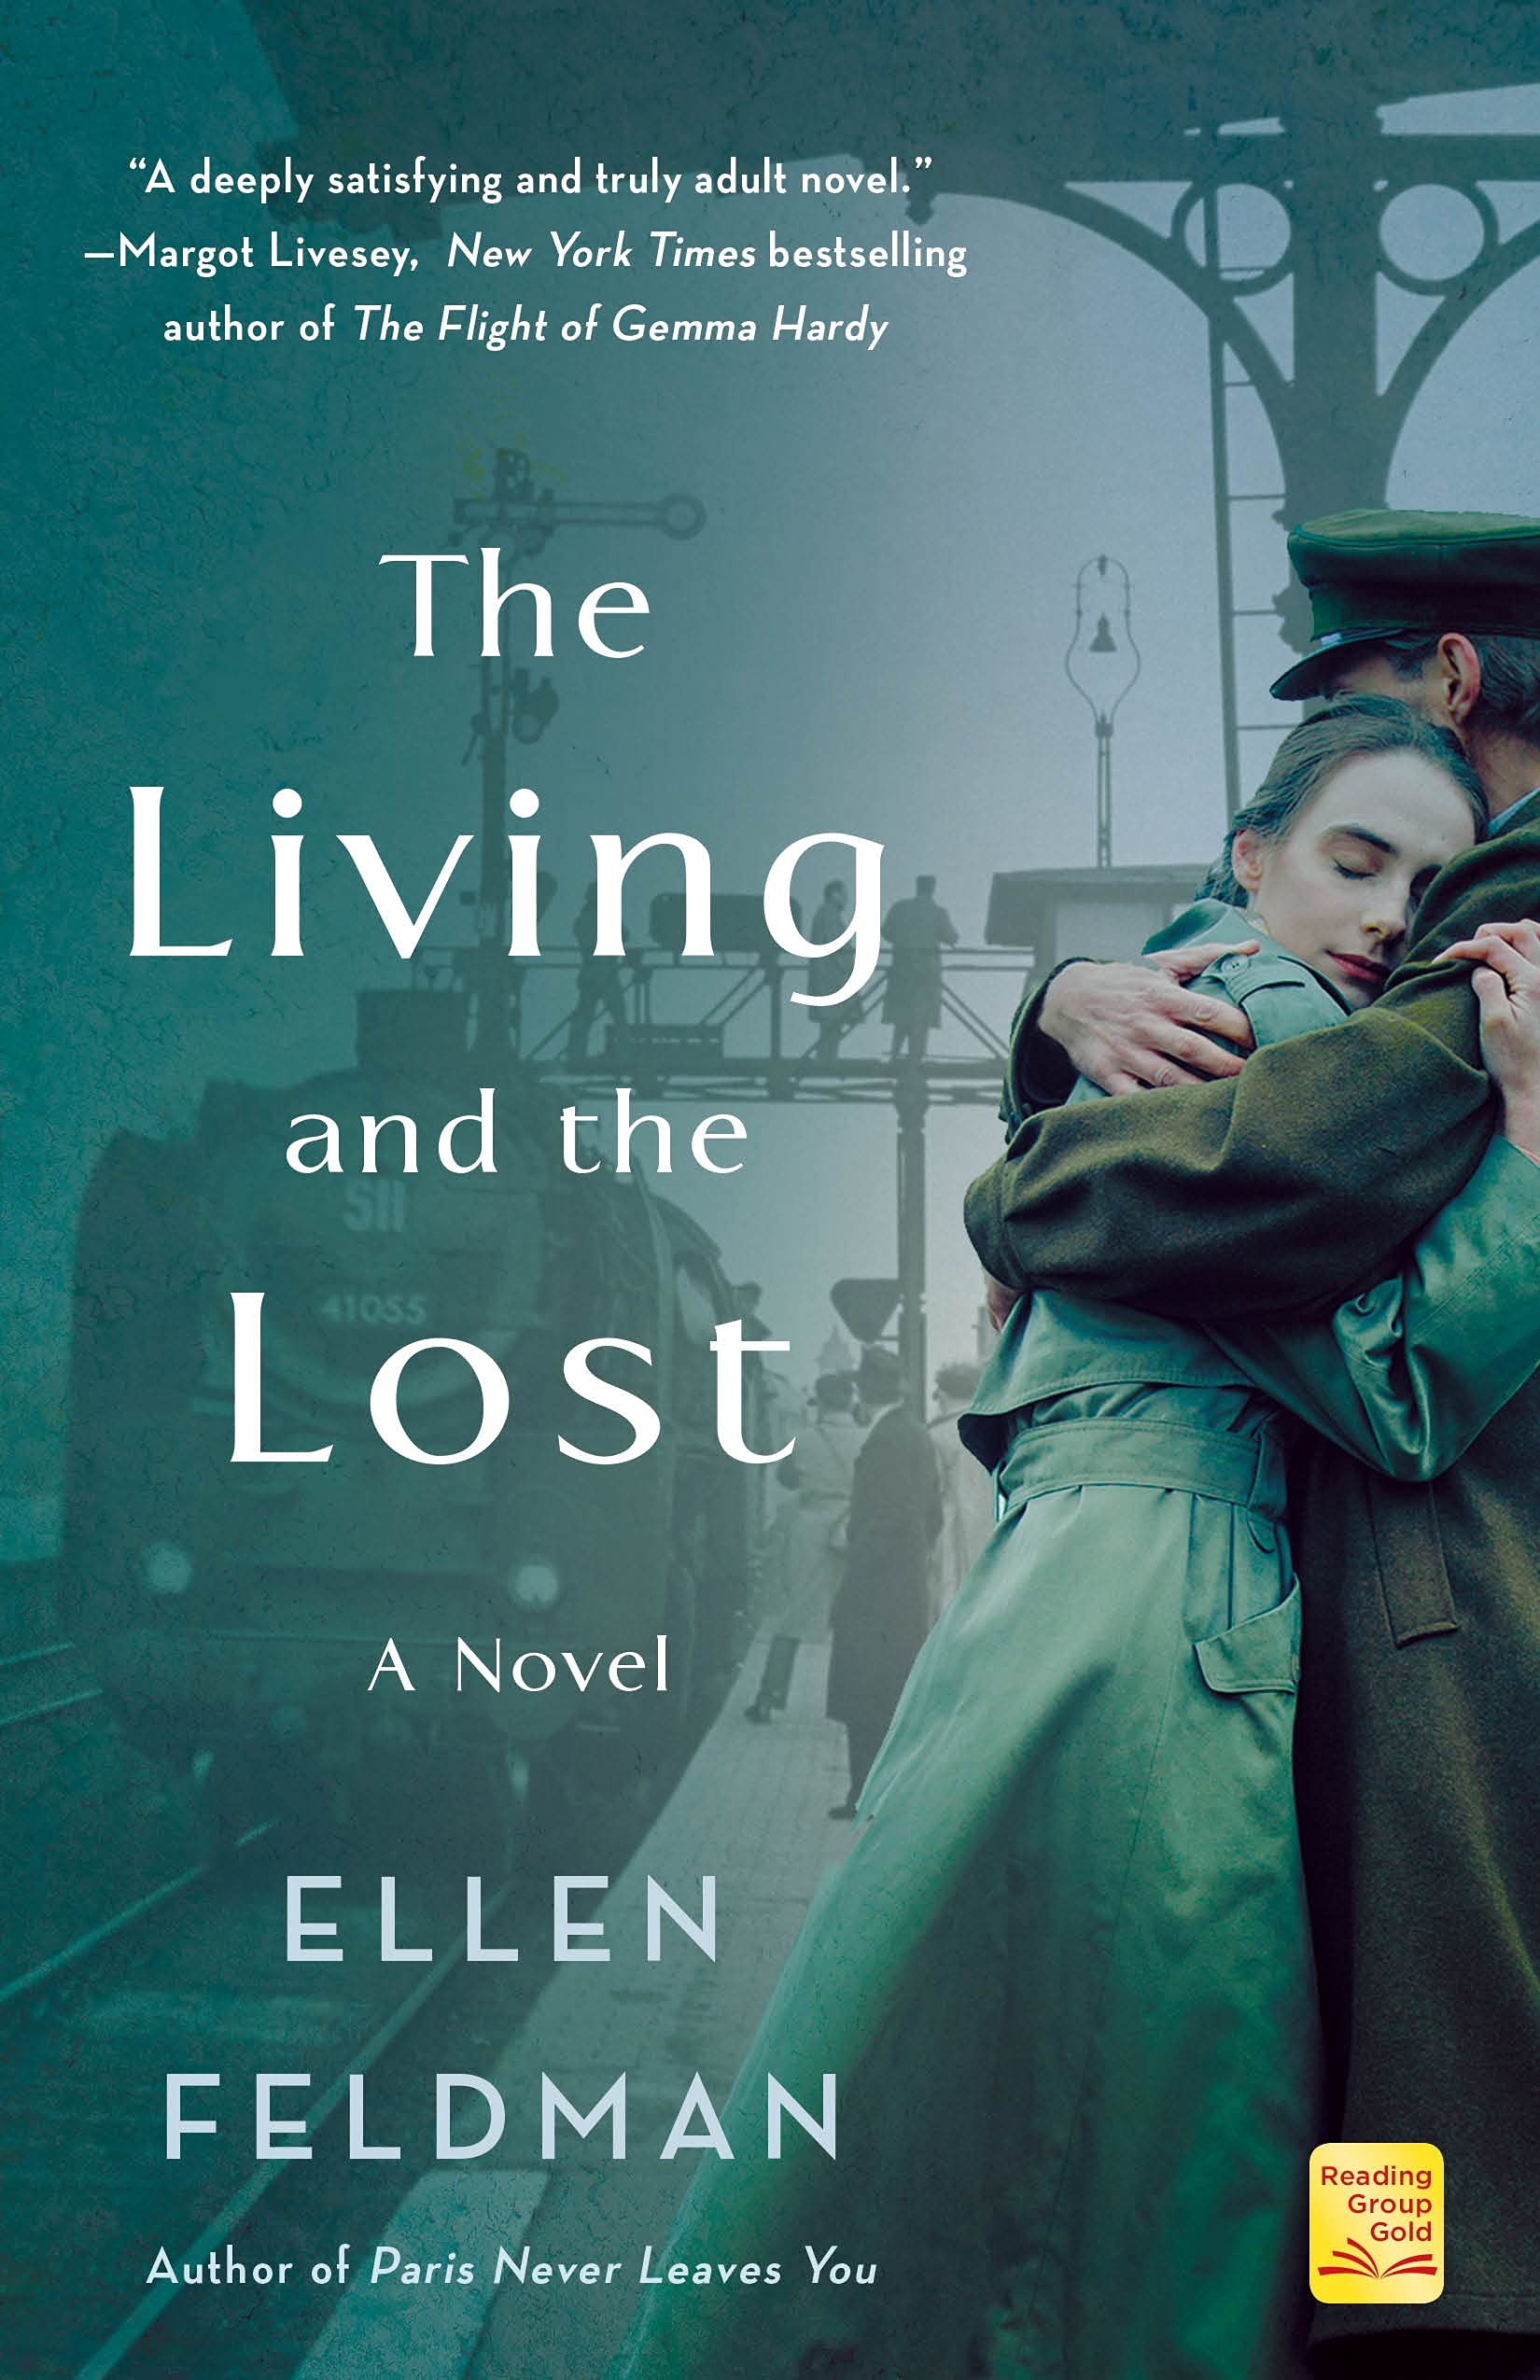 The Living and the Lost by Ellen Feldman book cover with a man in a WWII military uniform hugging a woman at the train station.